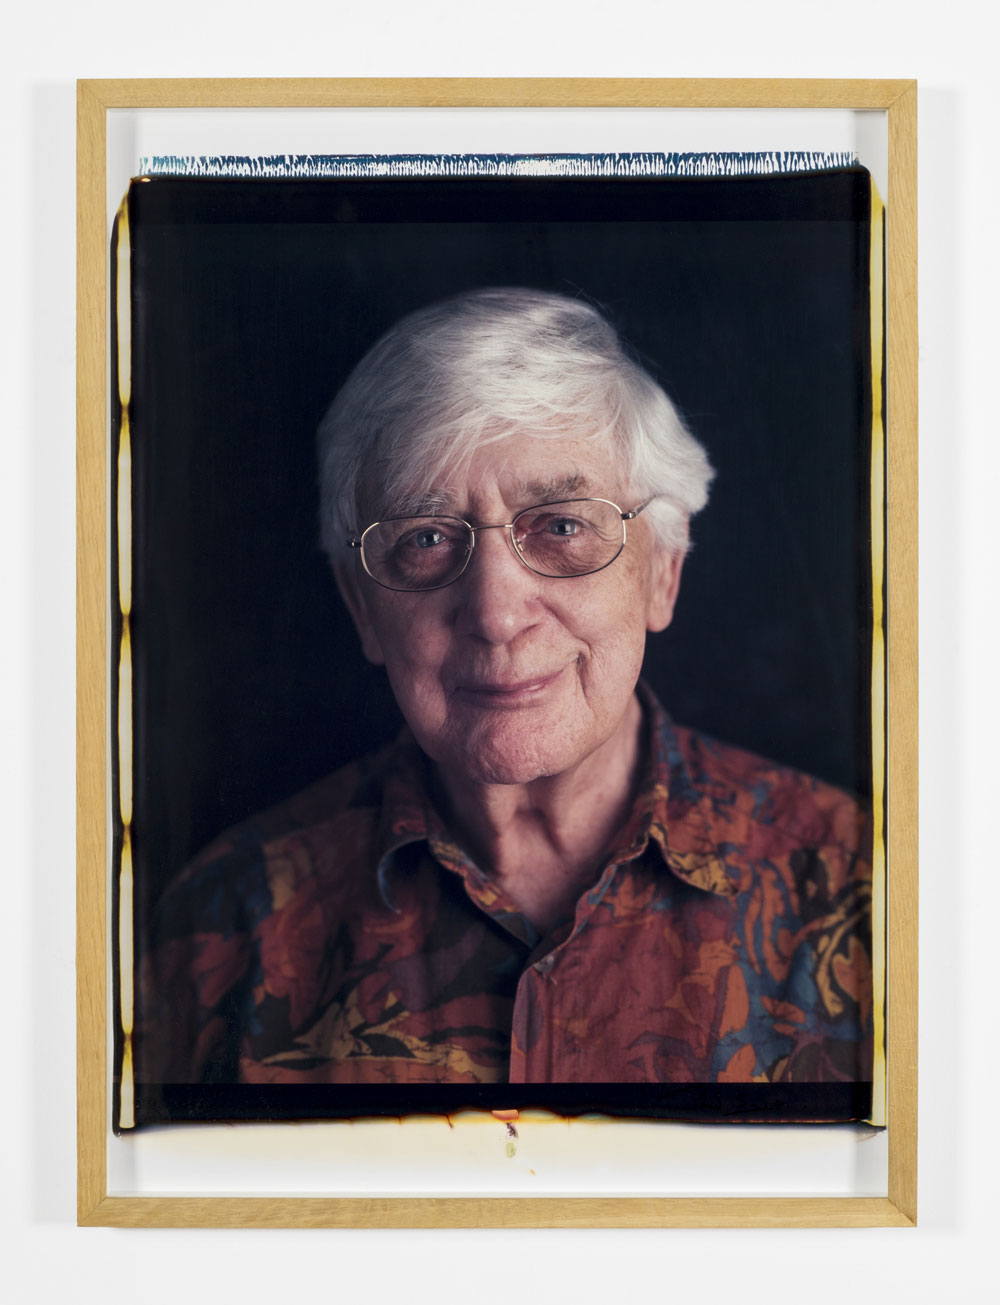 Edwin Morgan by Maud Sulter, 2002 © Maud Sulter archive